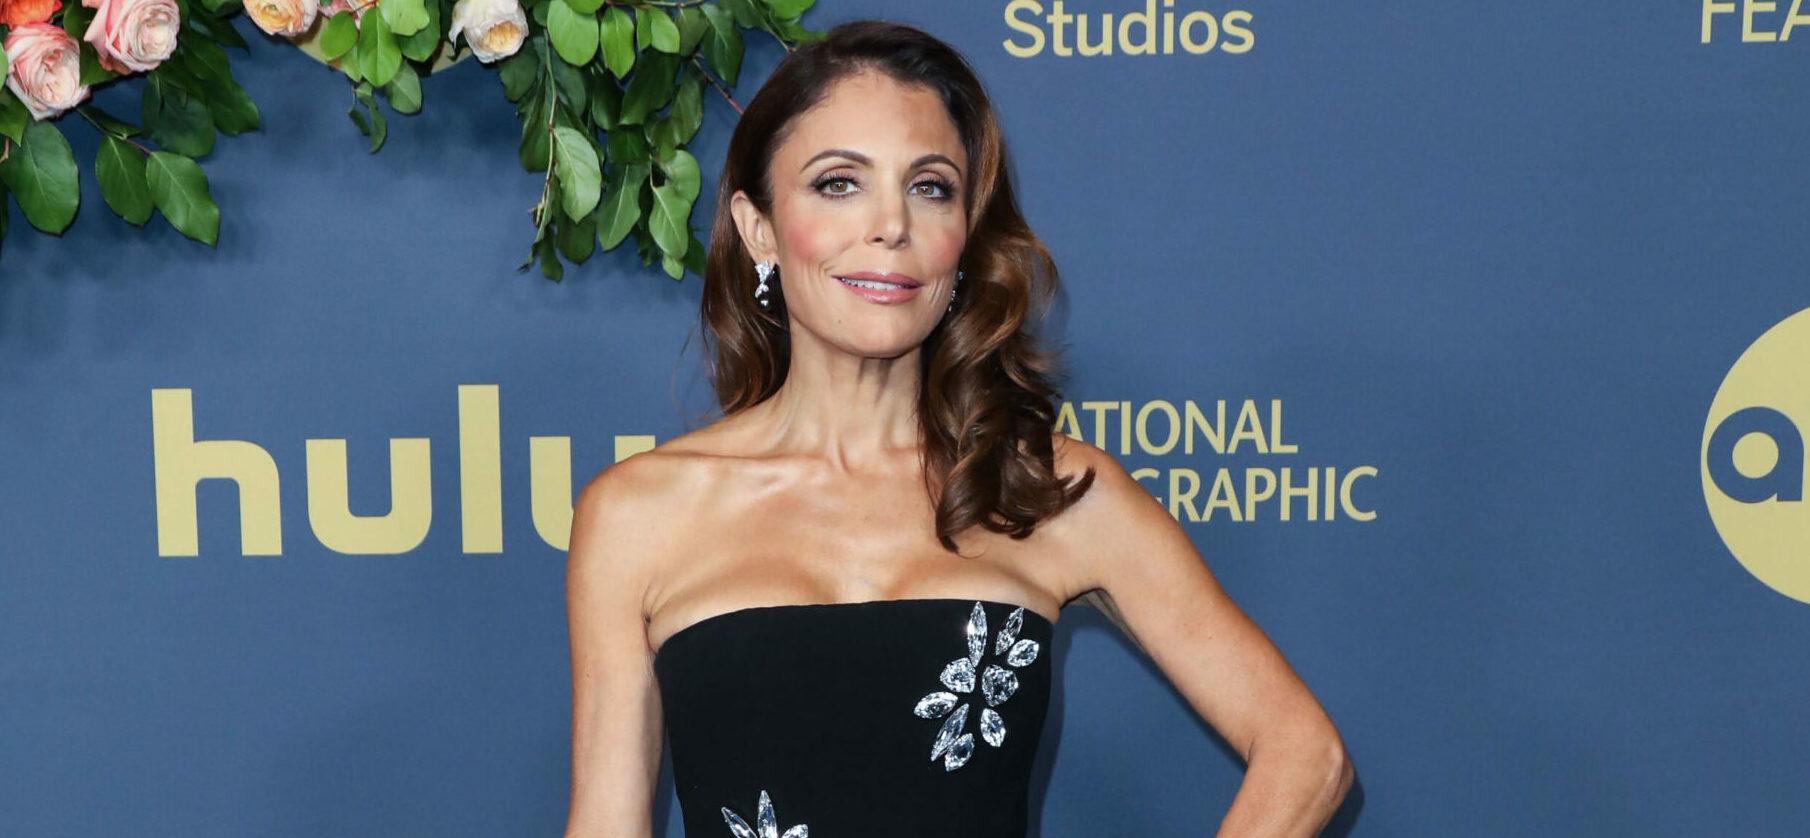 Bethenny Frankel Has A Problem With Famous ‘GRWM’ Trend… Here’s Why